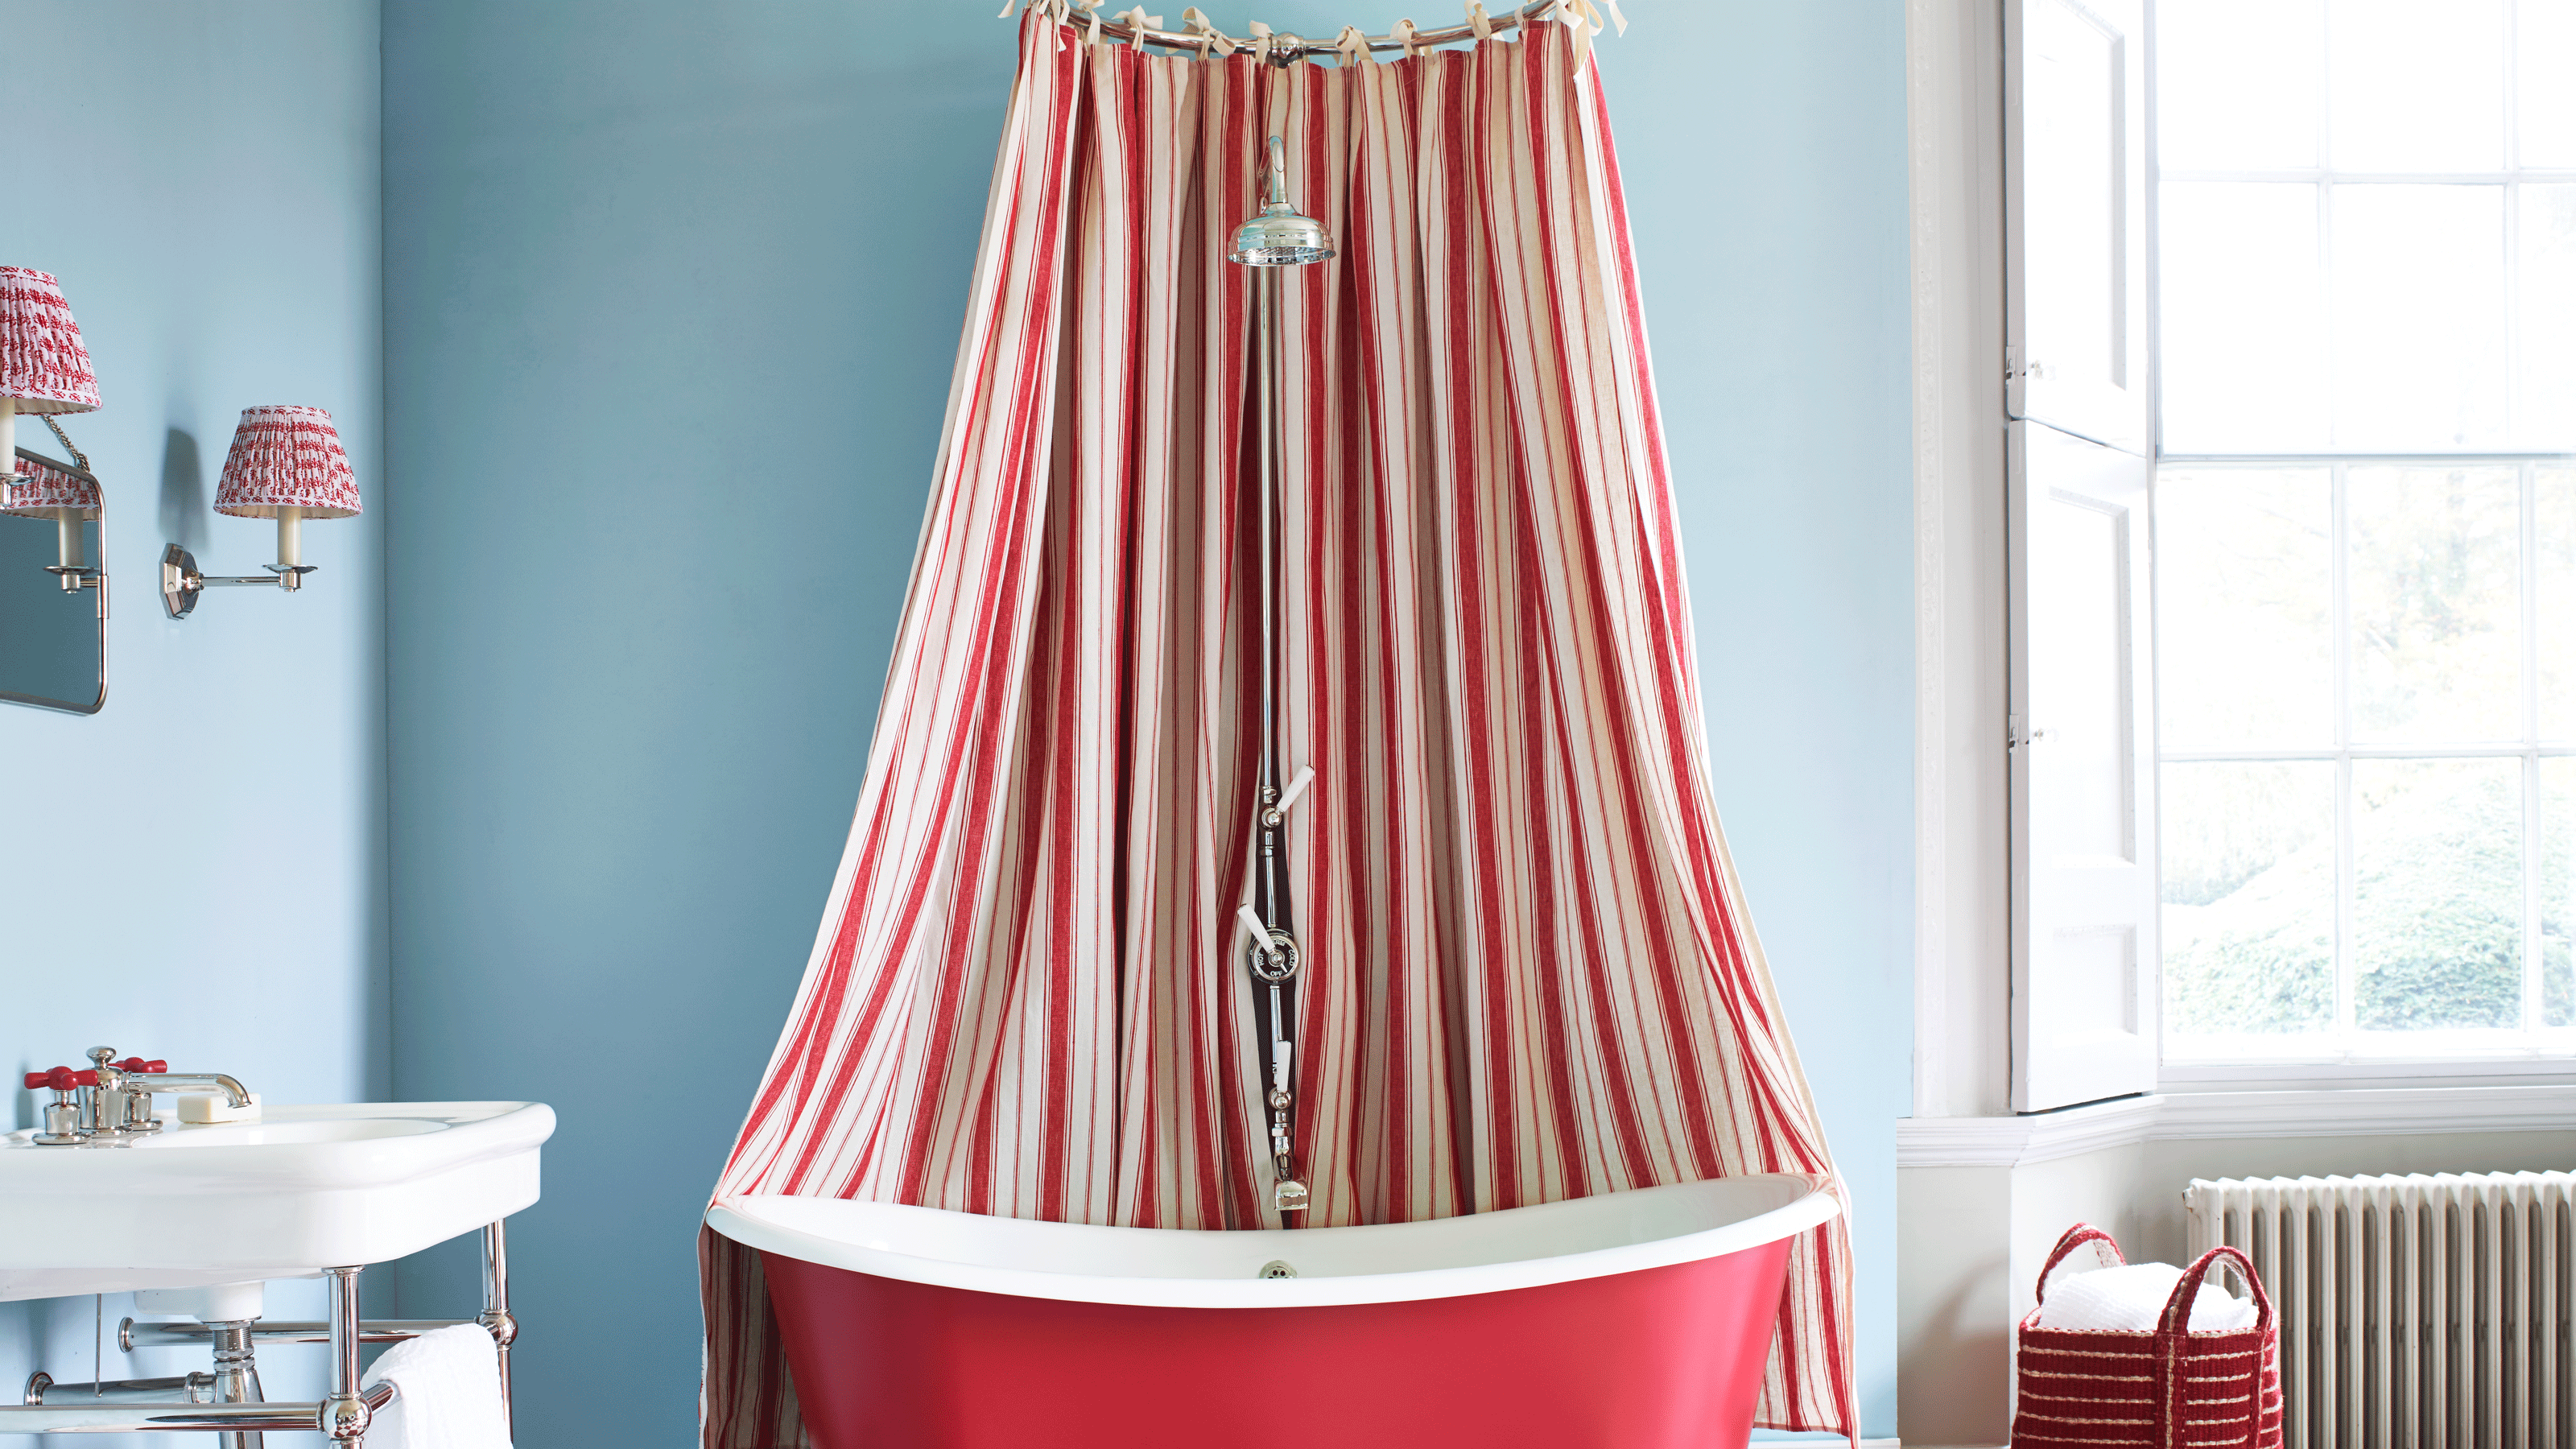 Red bath with red and white striped shower curtain